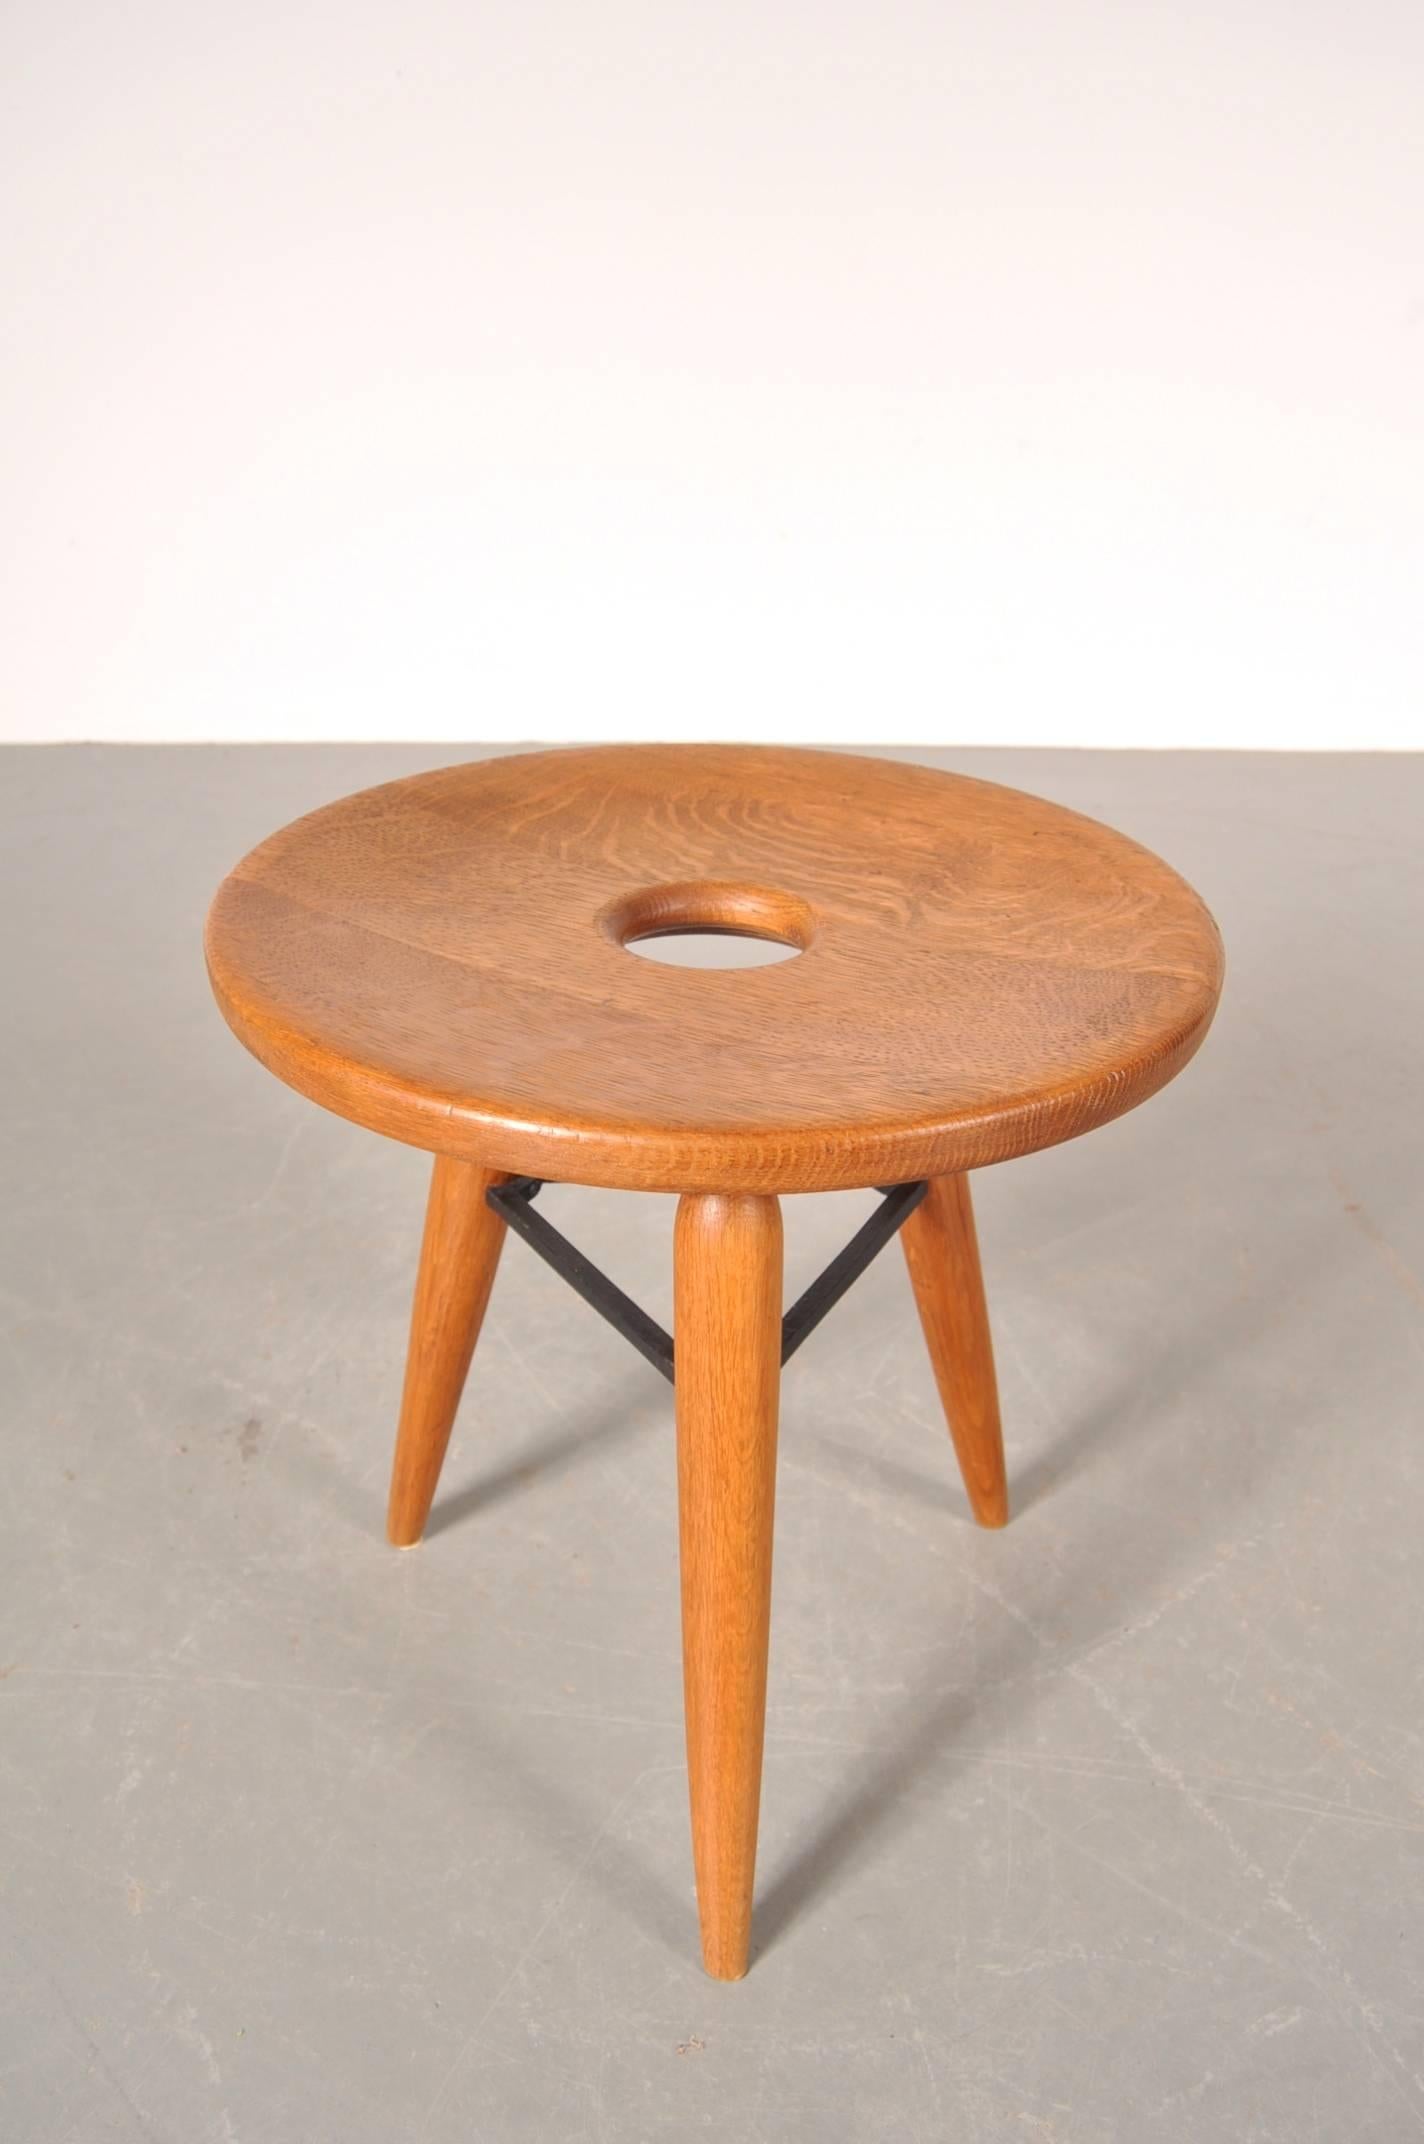 Beautiful wooden tripod stool, manufactured in France, circa 1950.

This unique piece is made of oak wood with cast iron supports. The round seat has a perforated hole in the middle, all together giving this wonderful piece an eye-catching